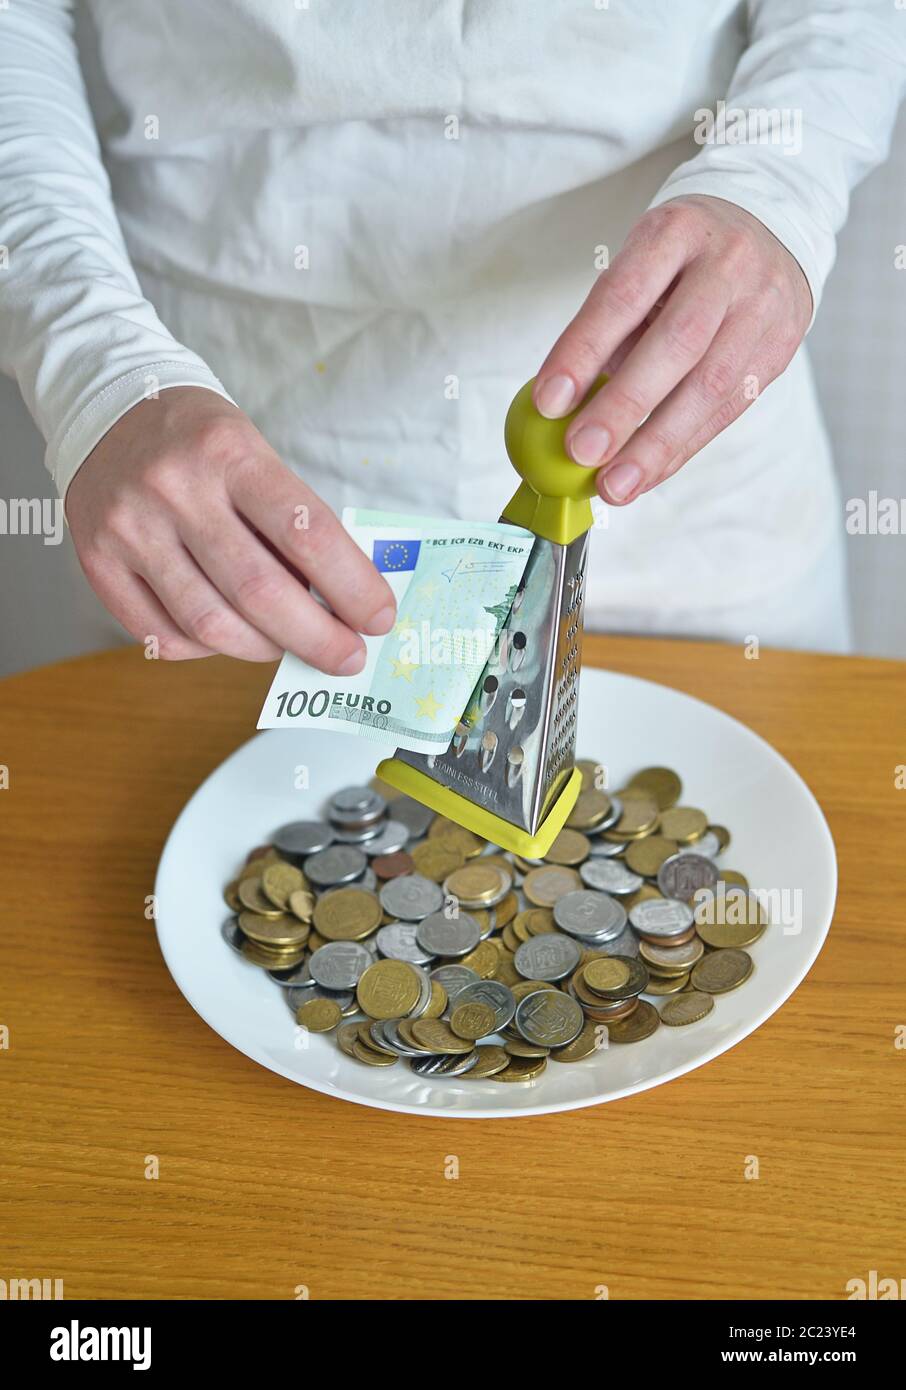 exchange euros for cents using a grater Stock Photo